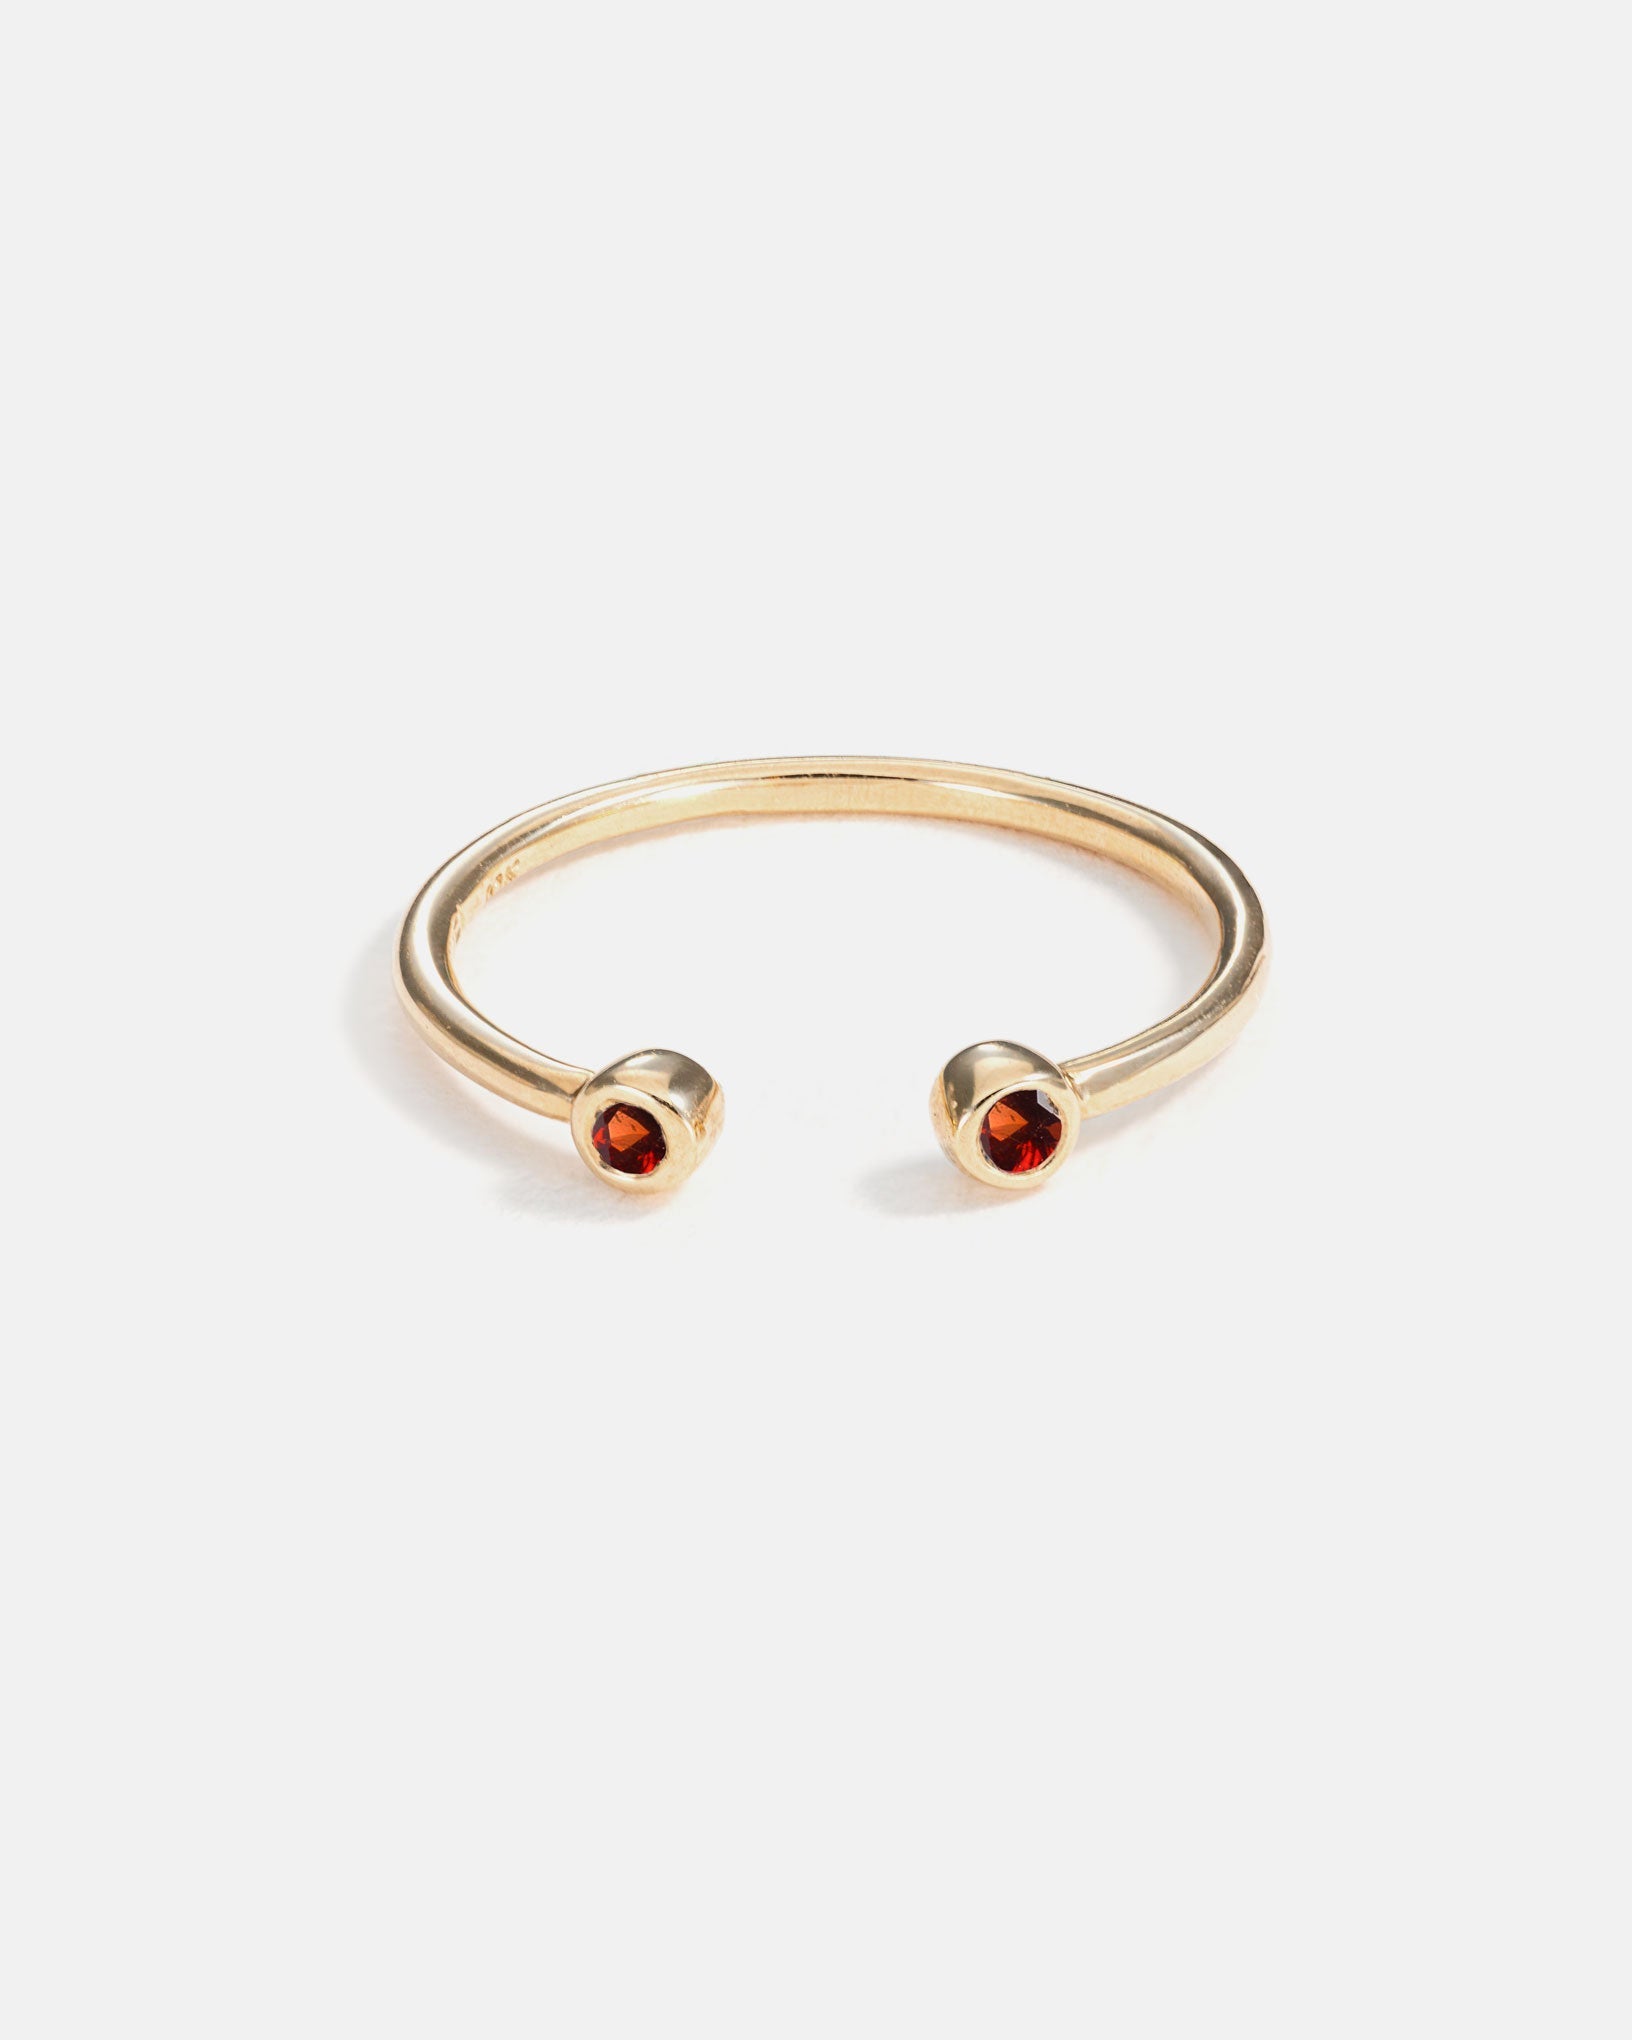 Hiro Band in Yellow Gold with Ethical Birthstones